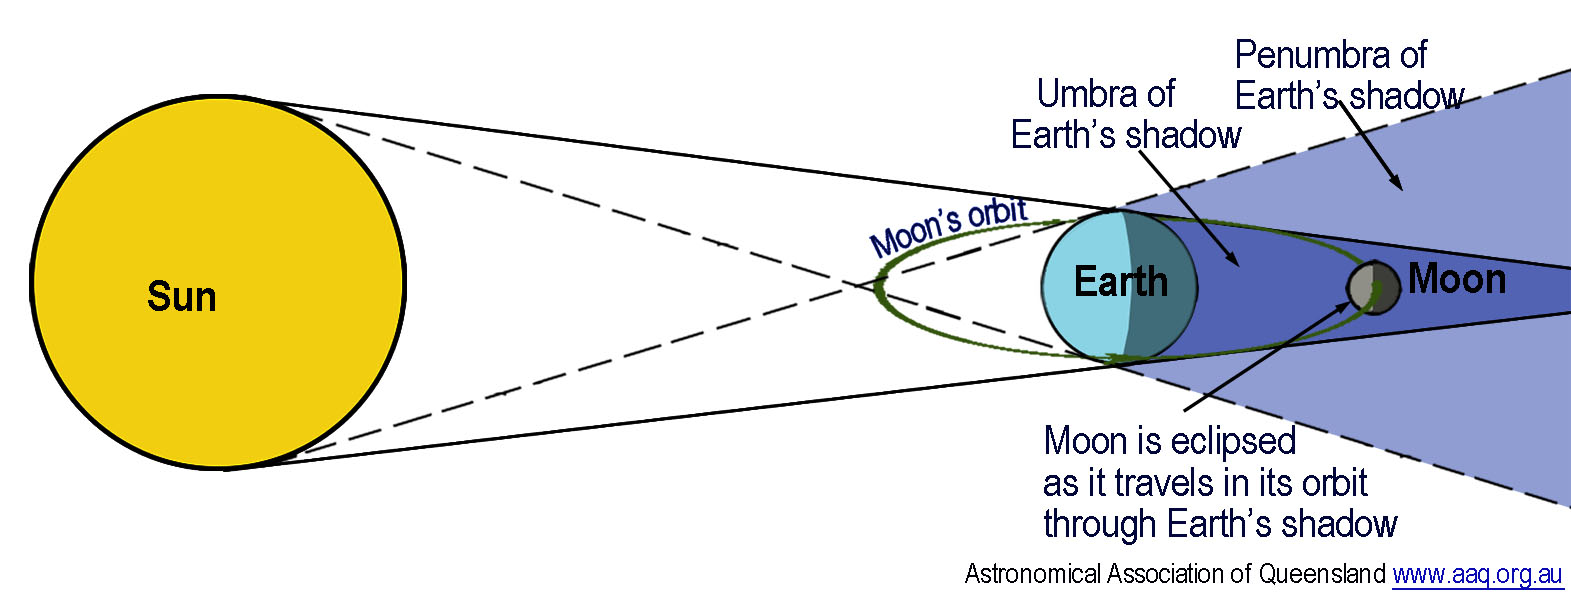 The diagram shows the Moon on the far side of Earth from the Sun, in Earth’s shadow. The umbra, which is the central dark part of Earth’s shadow, is shown as a dark cone behind Earth from the Sun where the total lunar eclipse occurs. Earth’s penumbra which is Earth’s lighter outer shadow is shown surrounding the umbra indicating where a penumbral lunar eclipse would occur.